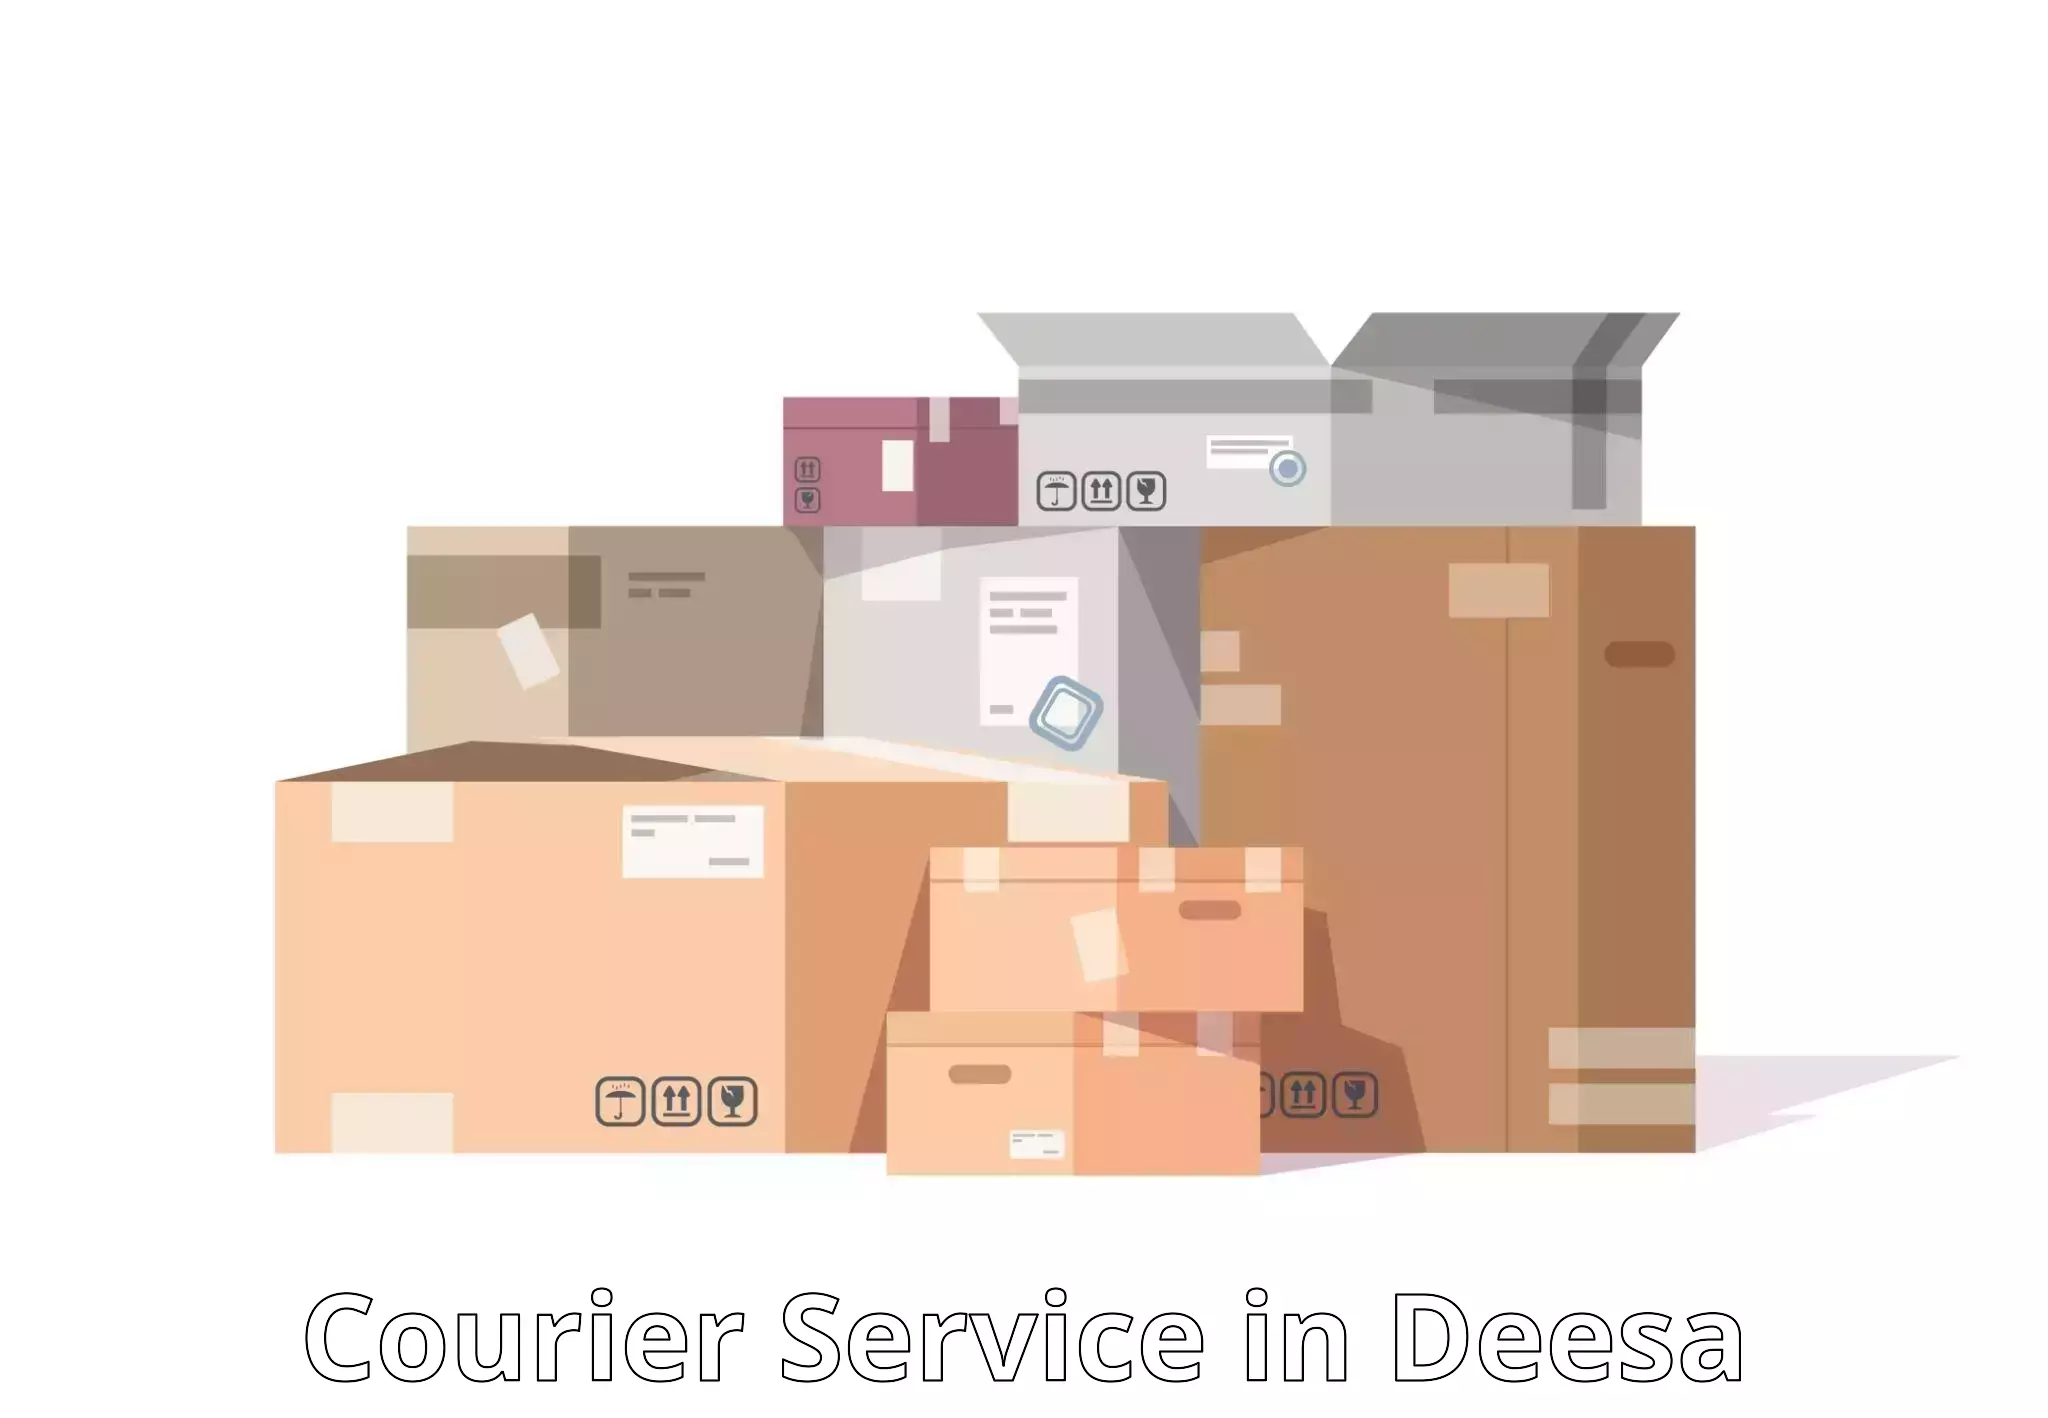 Express delivery capabilities in Deesa